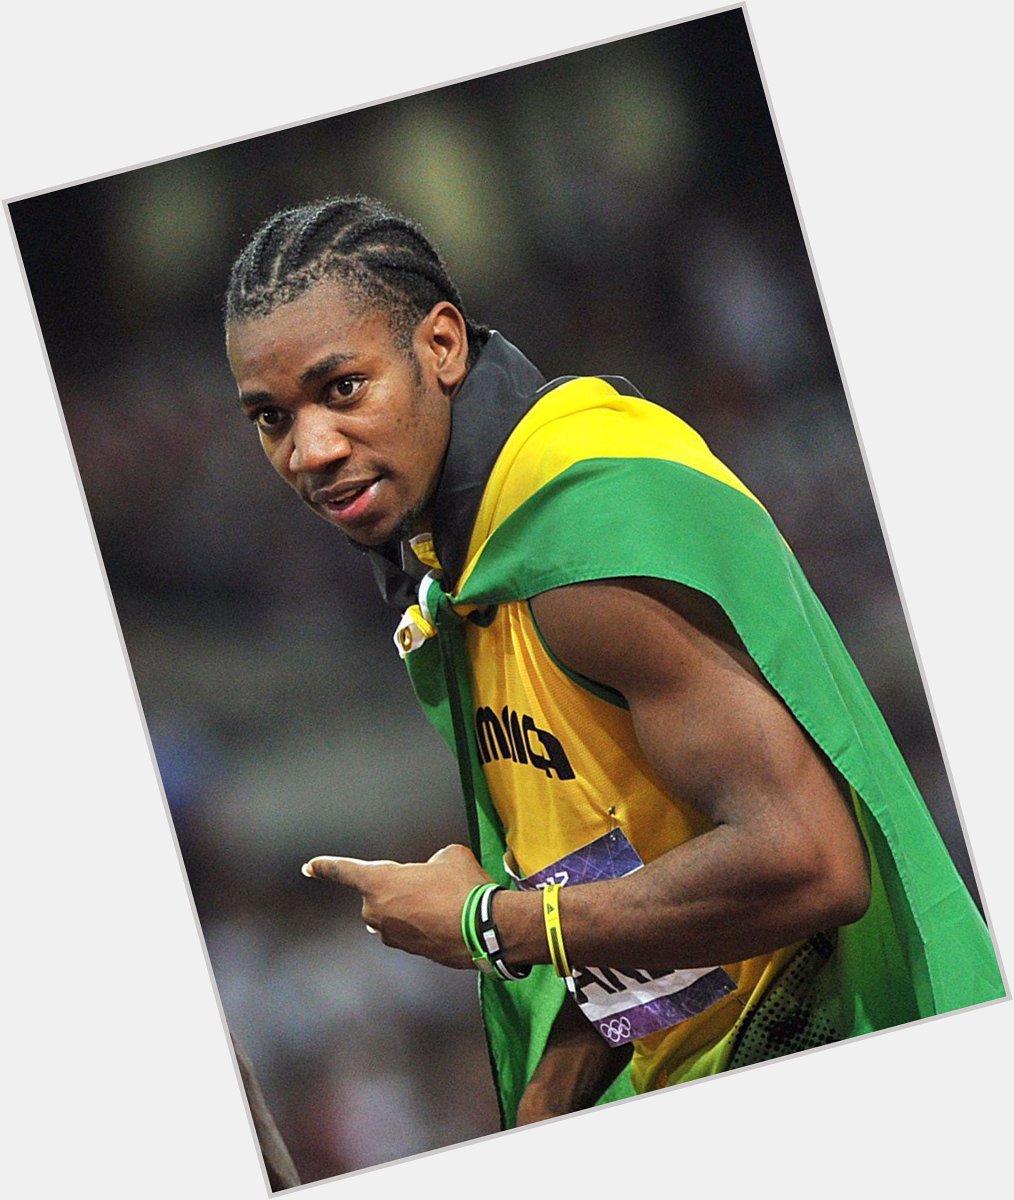 Happy 26th Birthday Yohan Blake! All the best for 2  0  1  6       